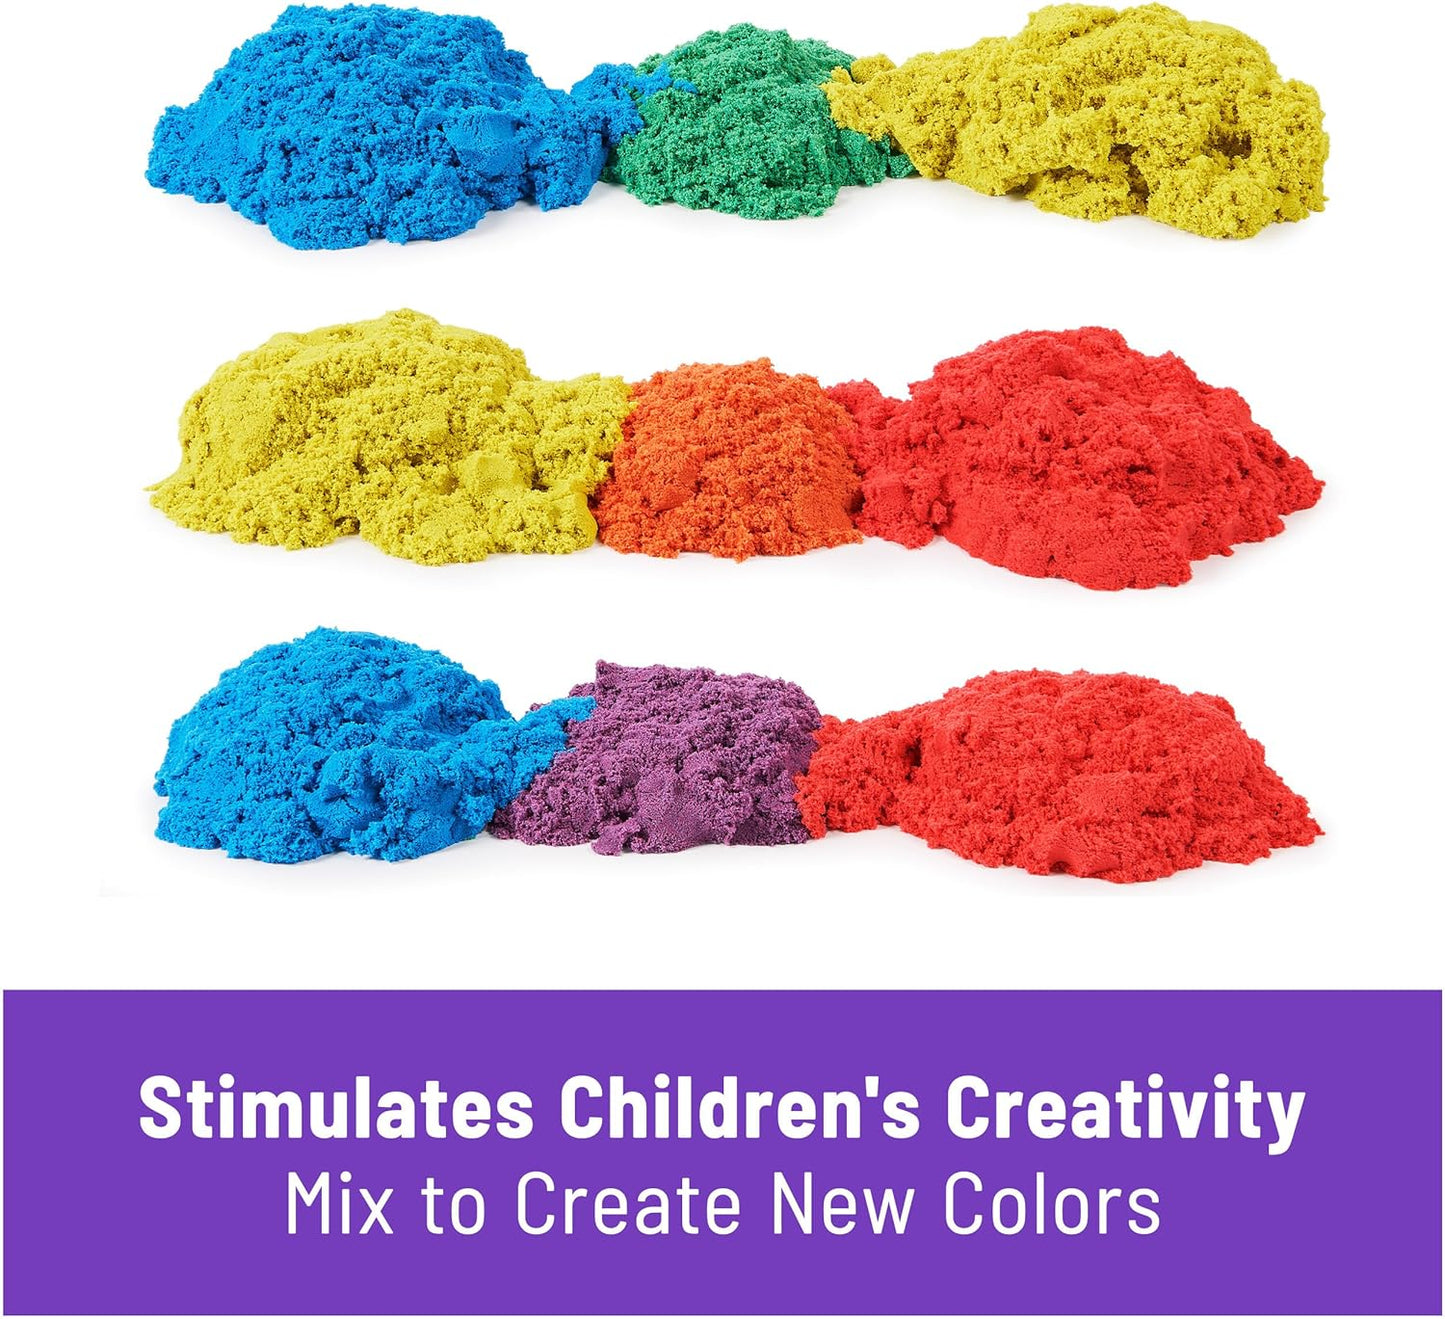 Kinetic Sand, 20-Pack Eggs with Red, Yellow, and Blue Play Sand, Easter Basket Stuffers, Goodie Bag Toys & Sensory Toys for Kids Ages 3+